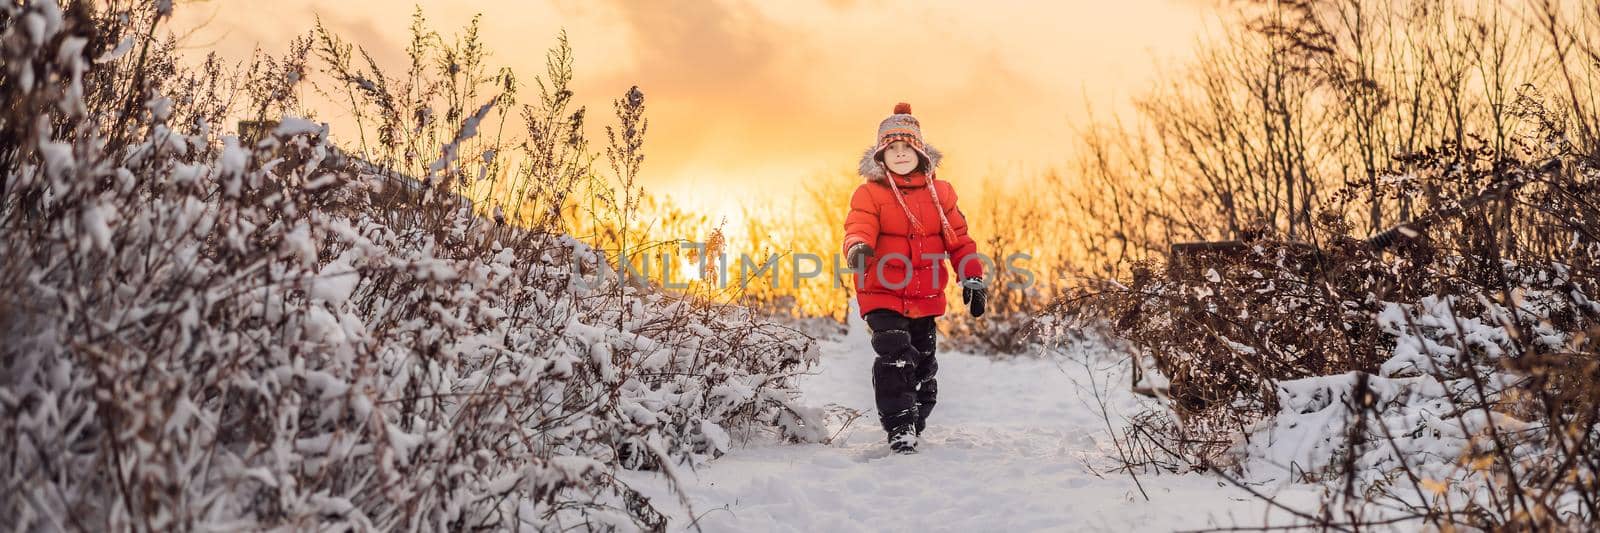 Cute boy in red winter clothes runs fun in the snow. Winter Fun Outdoor Concepts. BANNER, LONG FORMAT